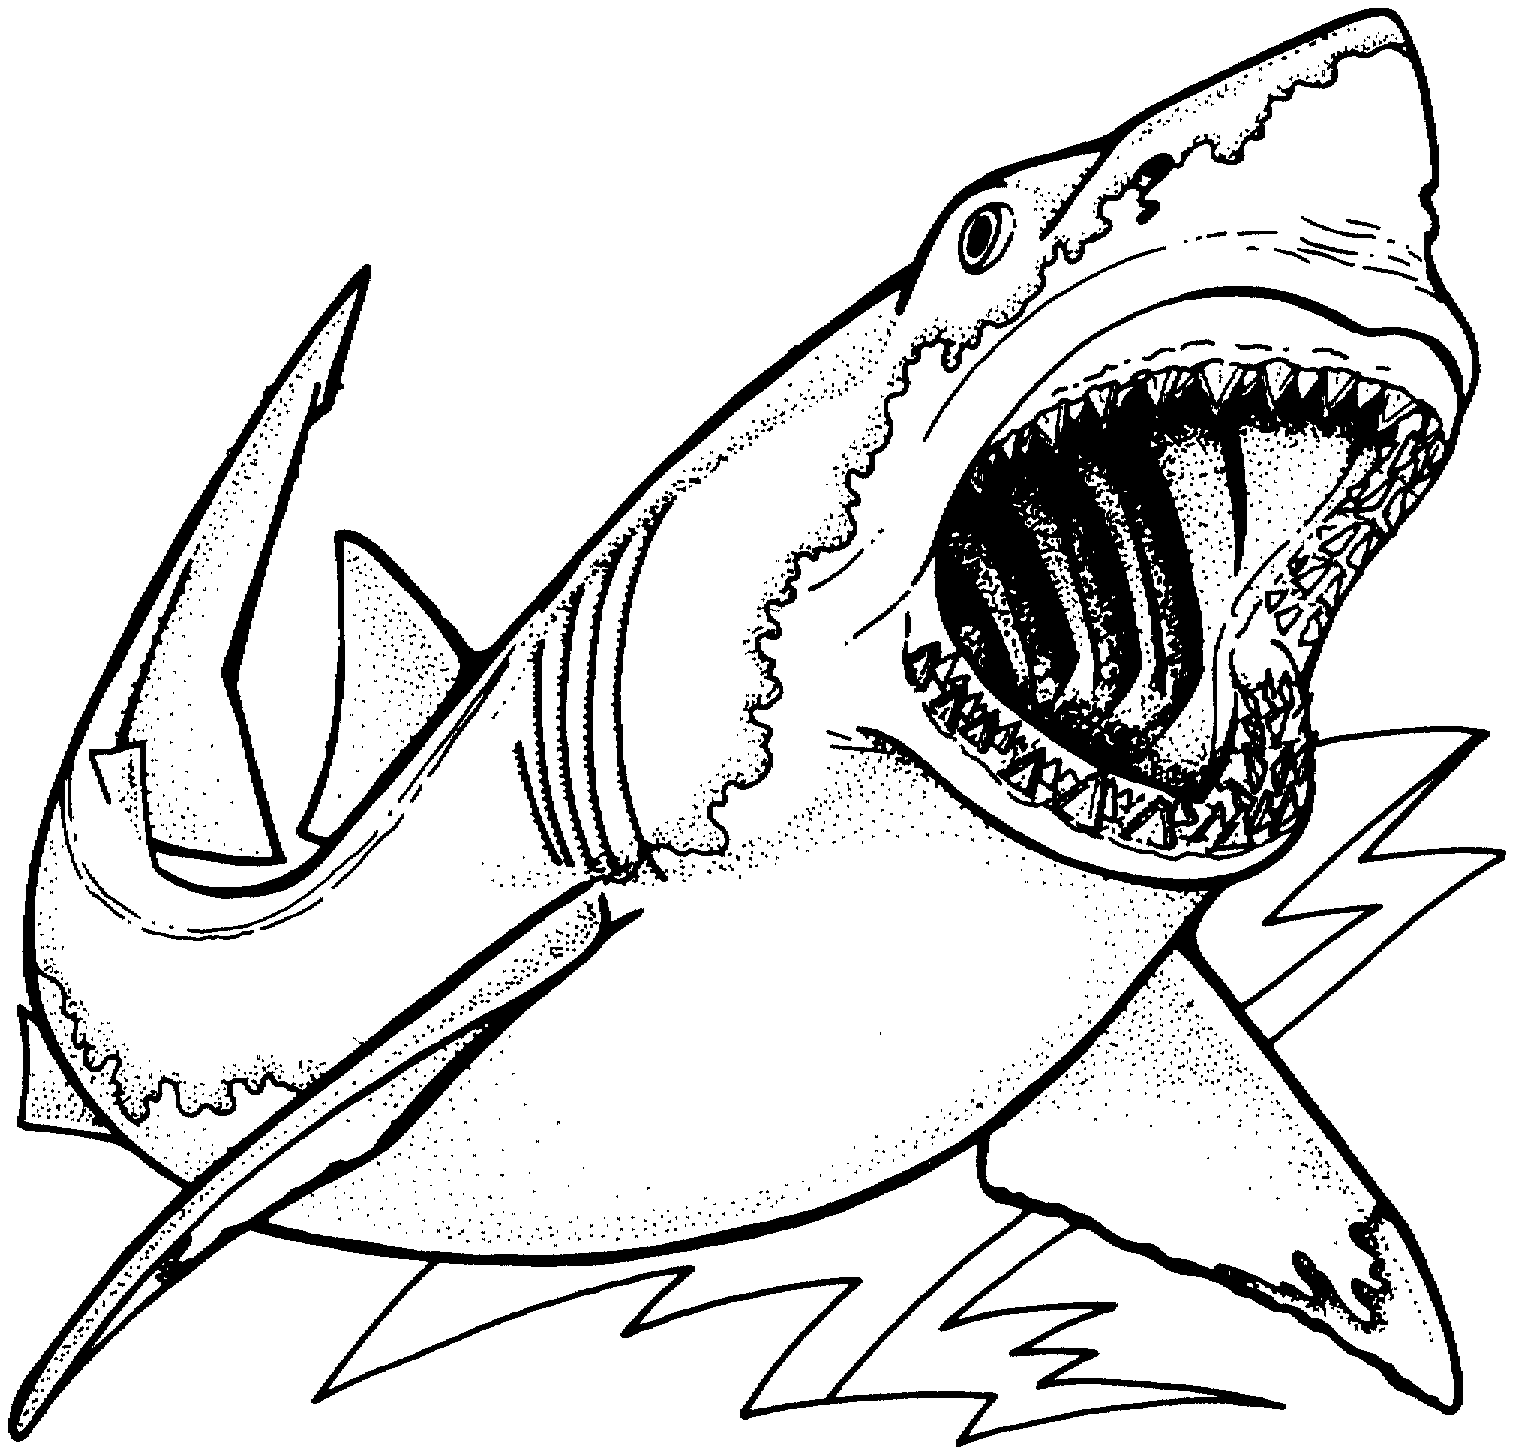 Shark Colouring Pictures To Print - High Quality Coloring Pages